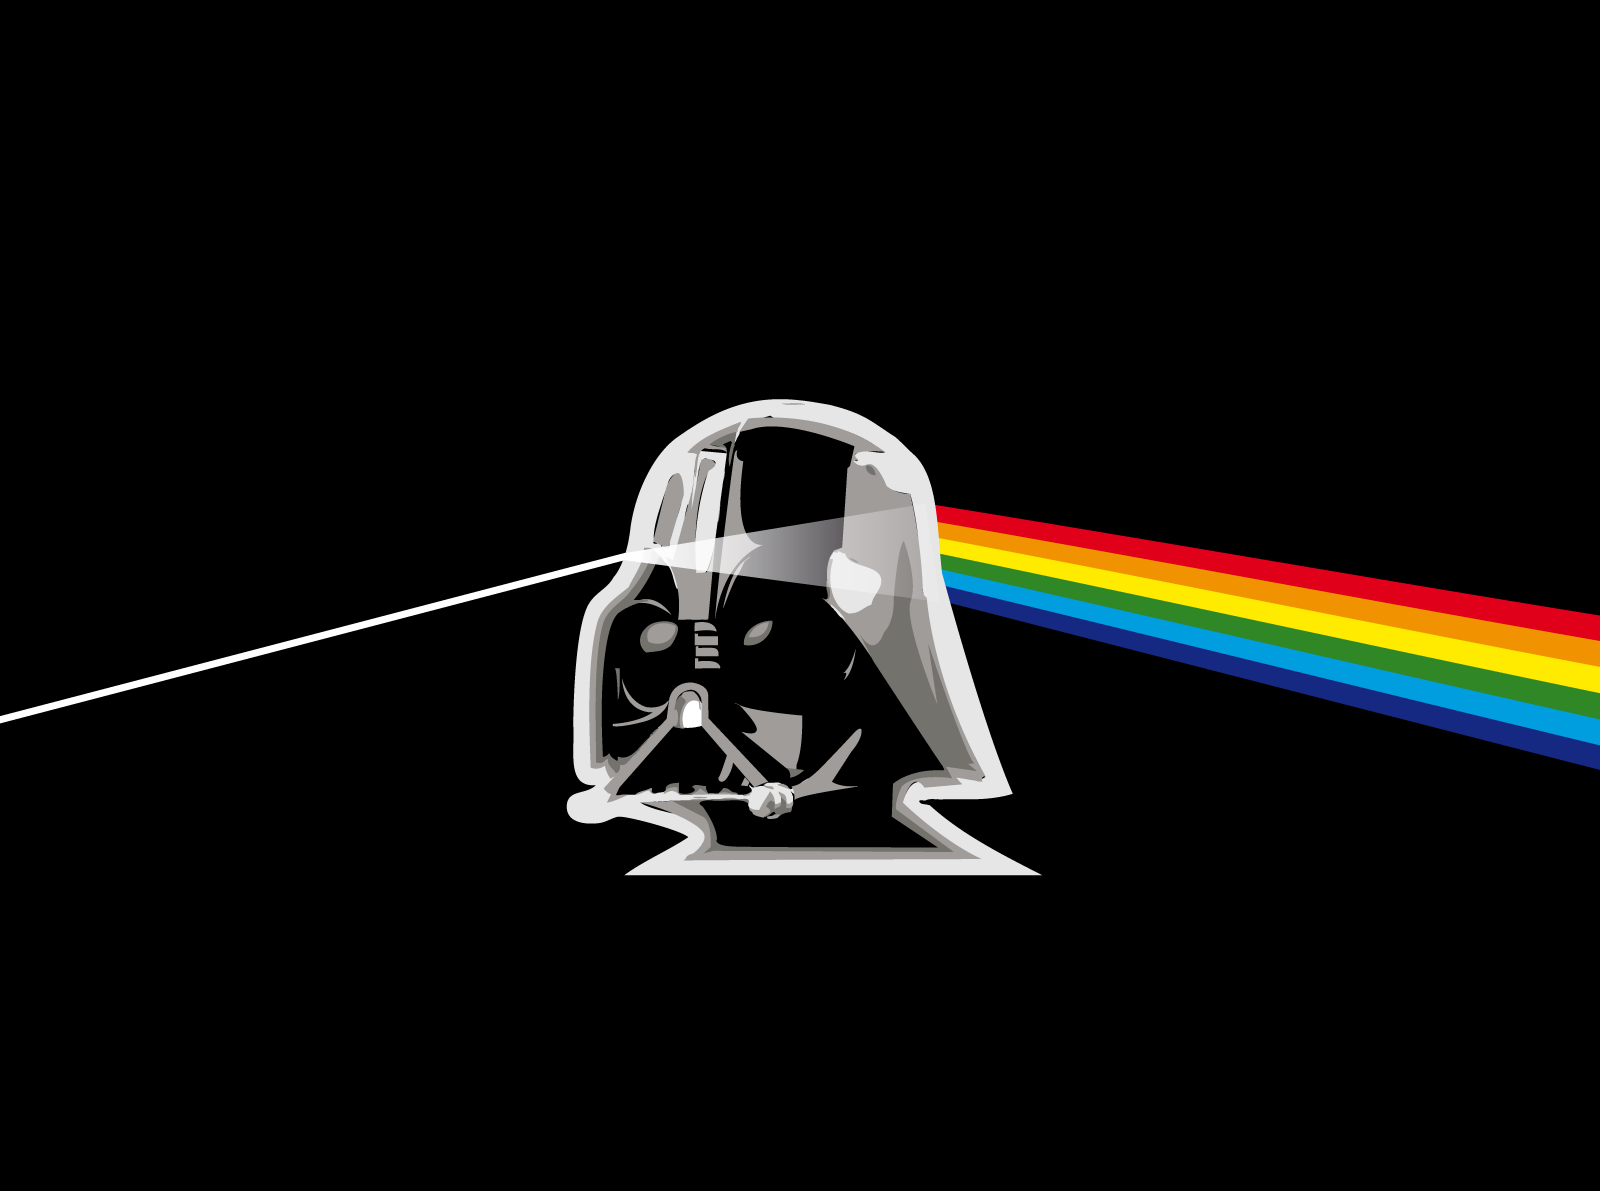 pink_floyd___darth_side_by_jstiehl.png